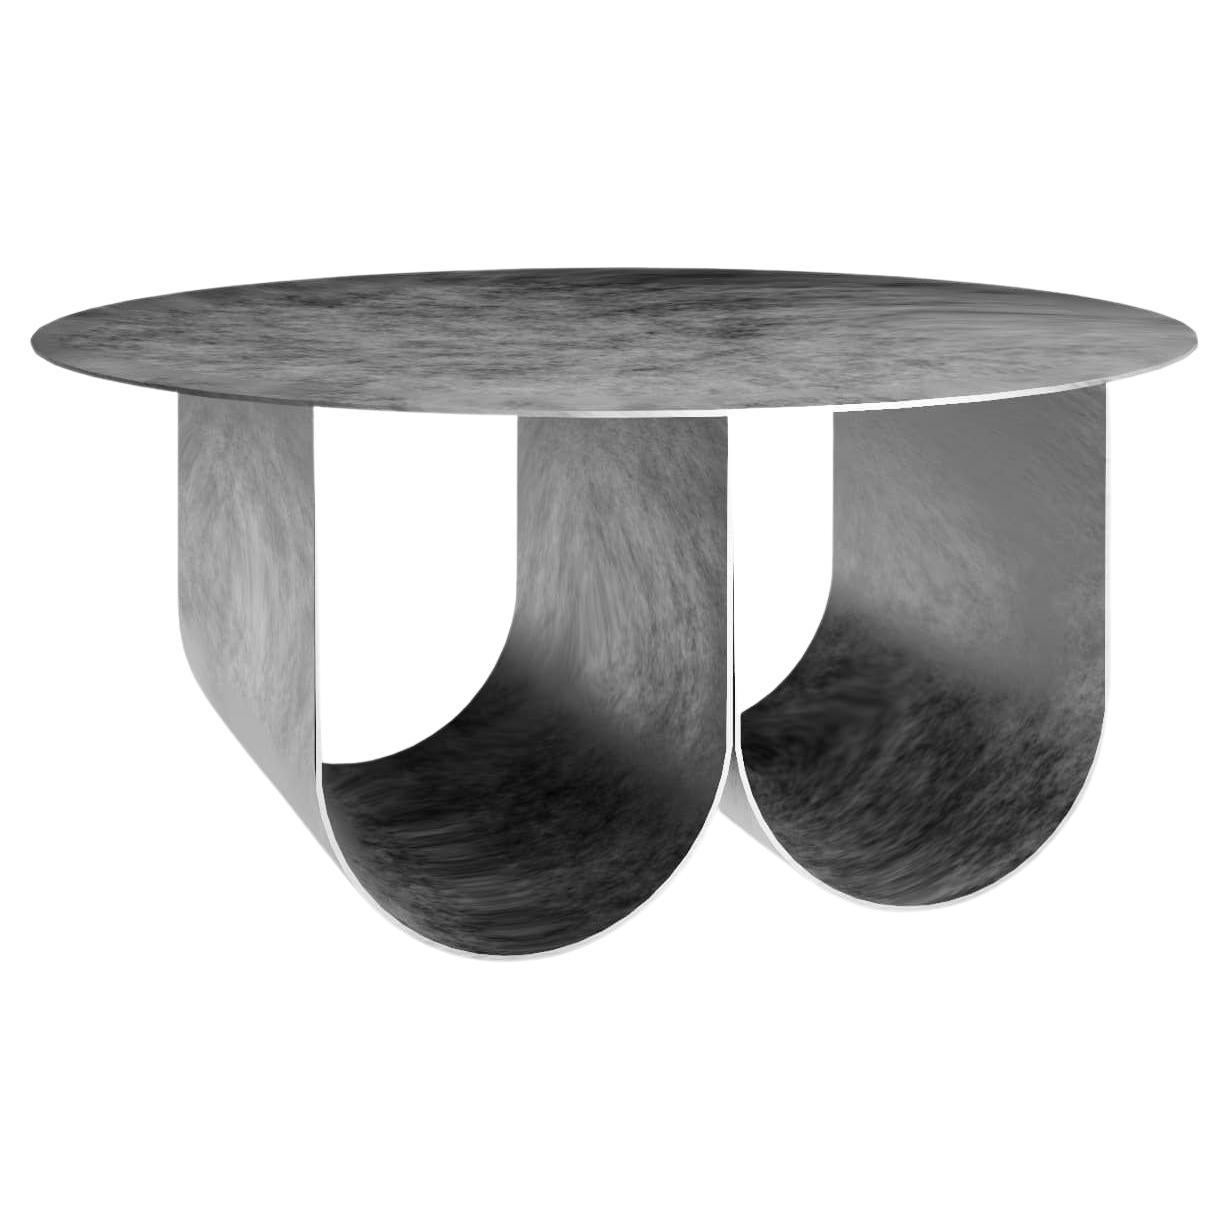 Arcade Coffee Table, 2 Arches Round Version, Silver, by Kasadamo & P. Tassin For Sale